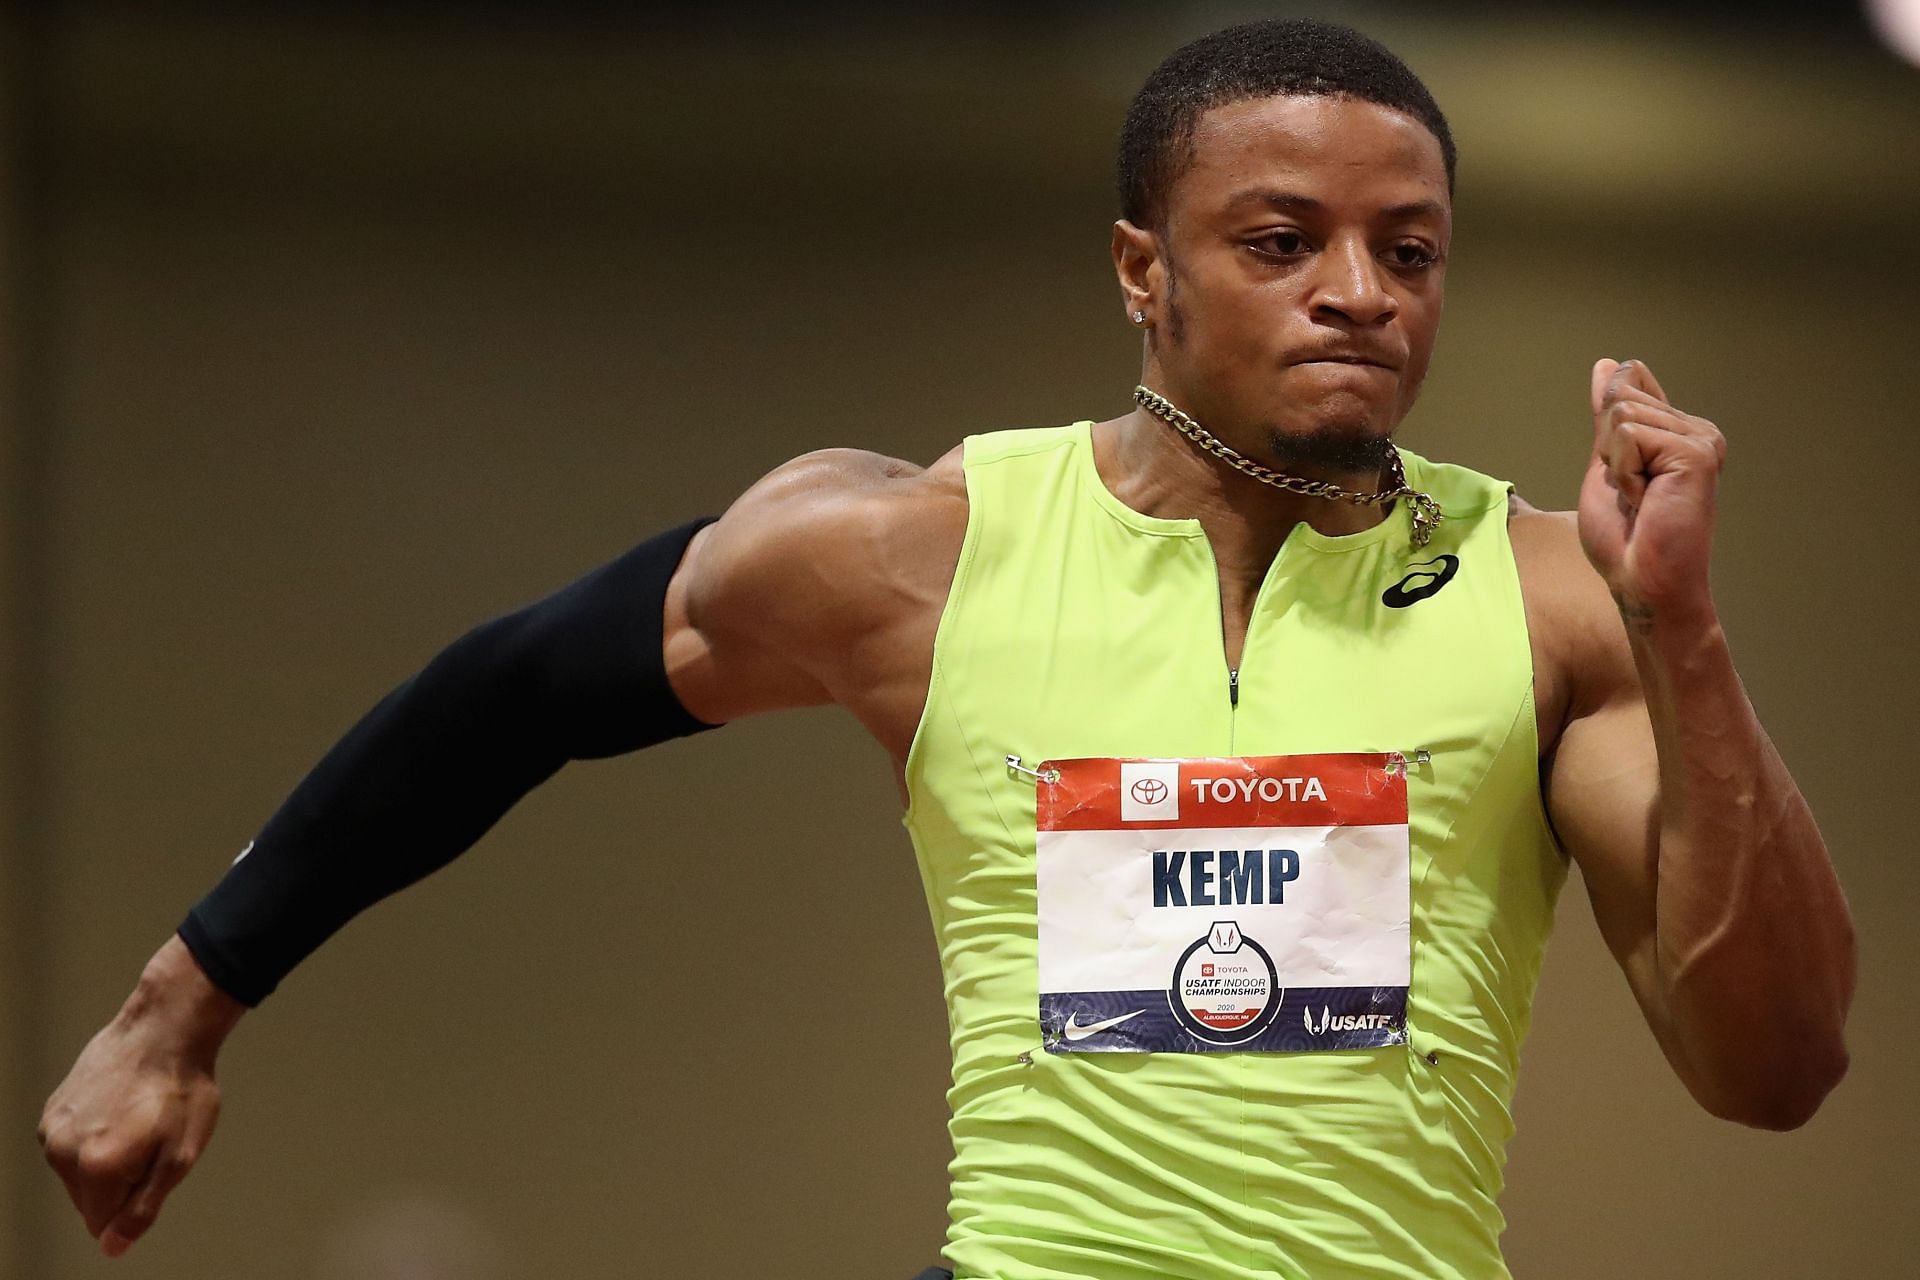 Demek Kemp was the only athlete from the United States who clinched the first position at the Astana Indoor Meet. (Photo by Christian Petersen/Getty Images)